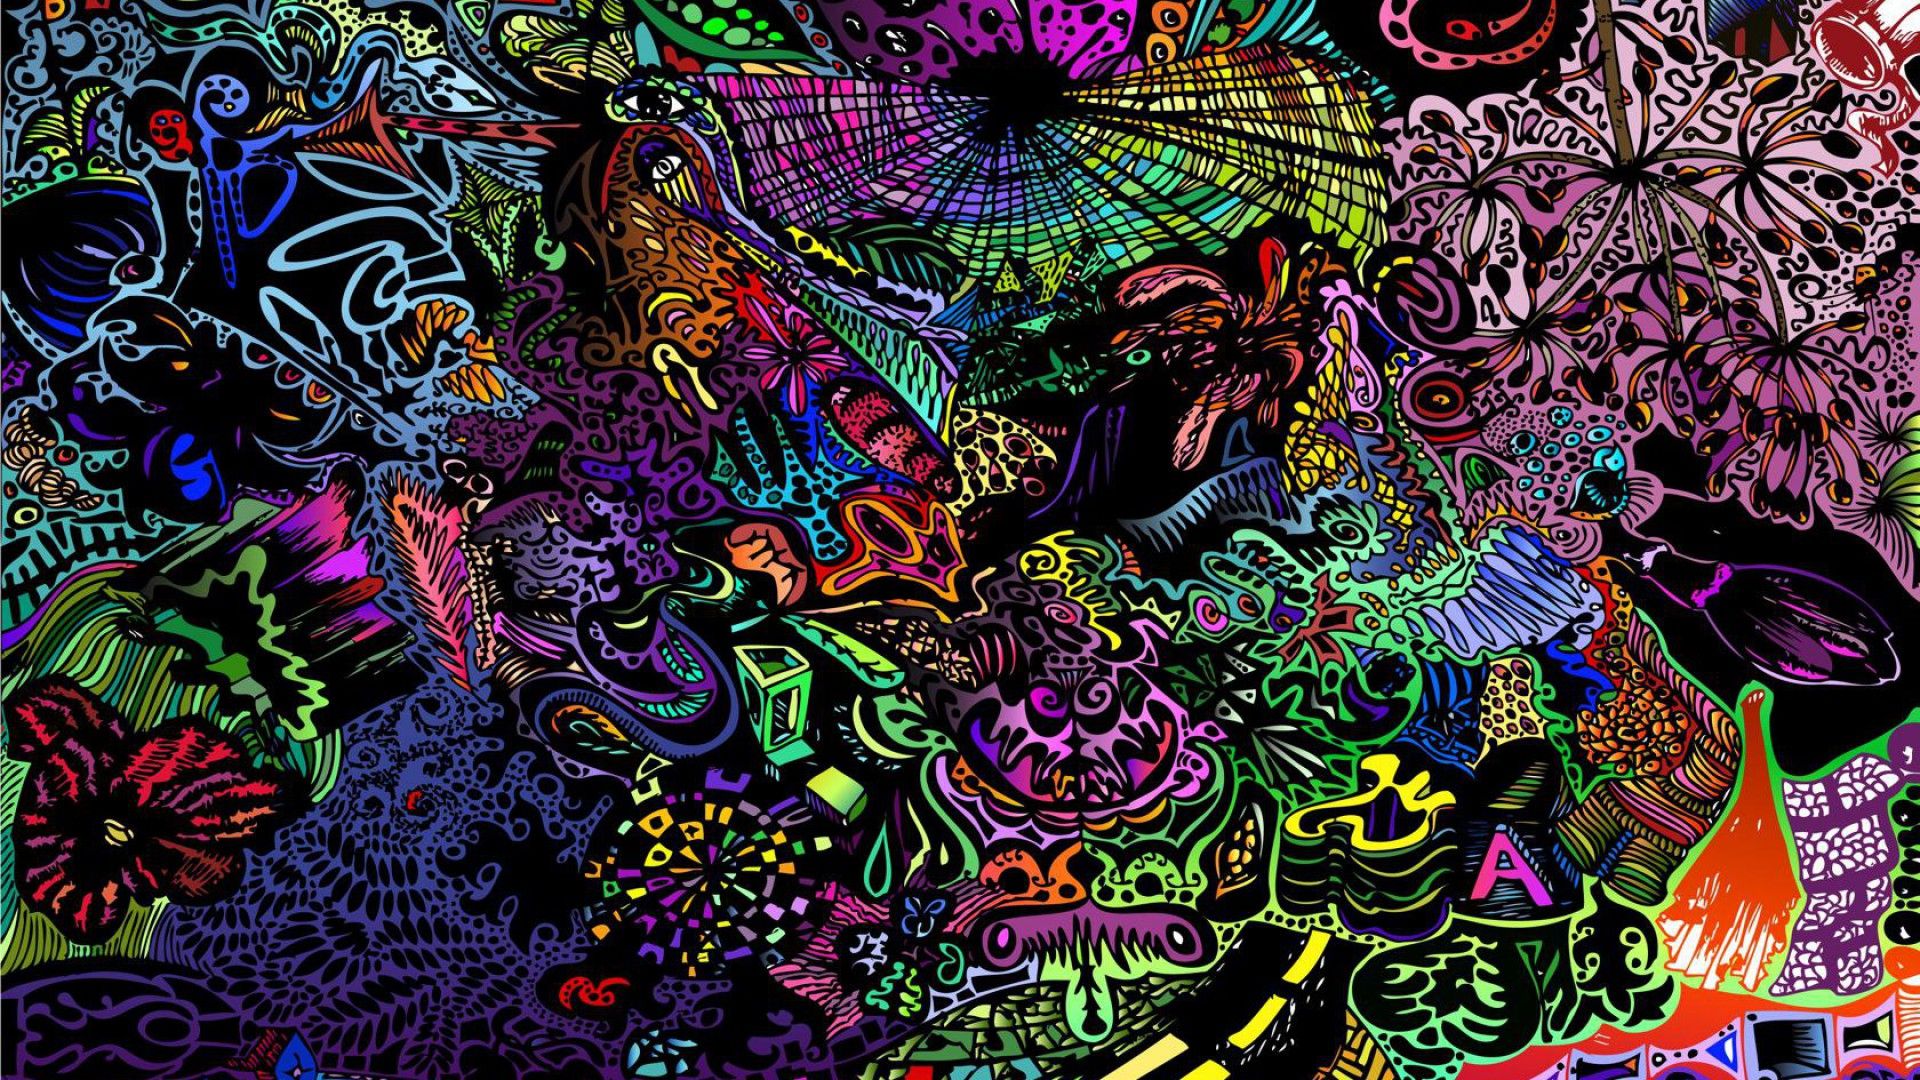 Trippy Wallpapers Hd Space Free High Definition Unique Hd